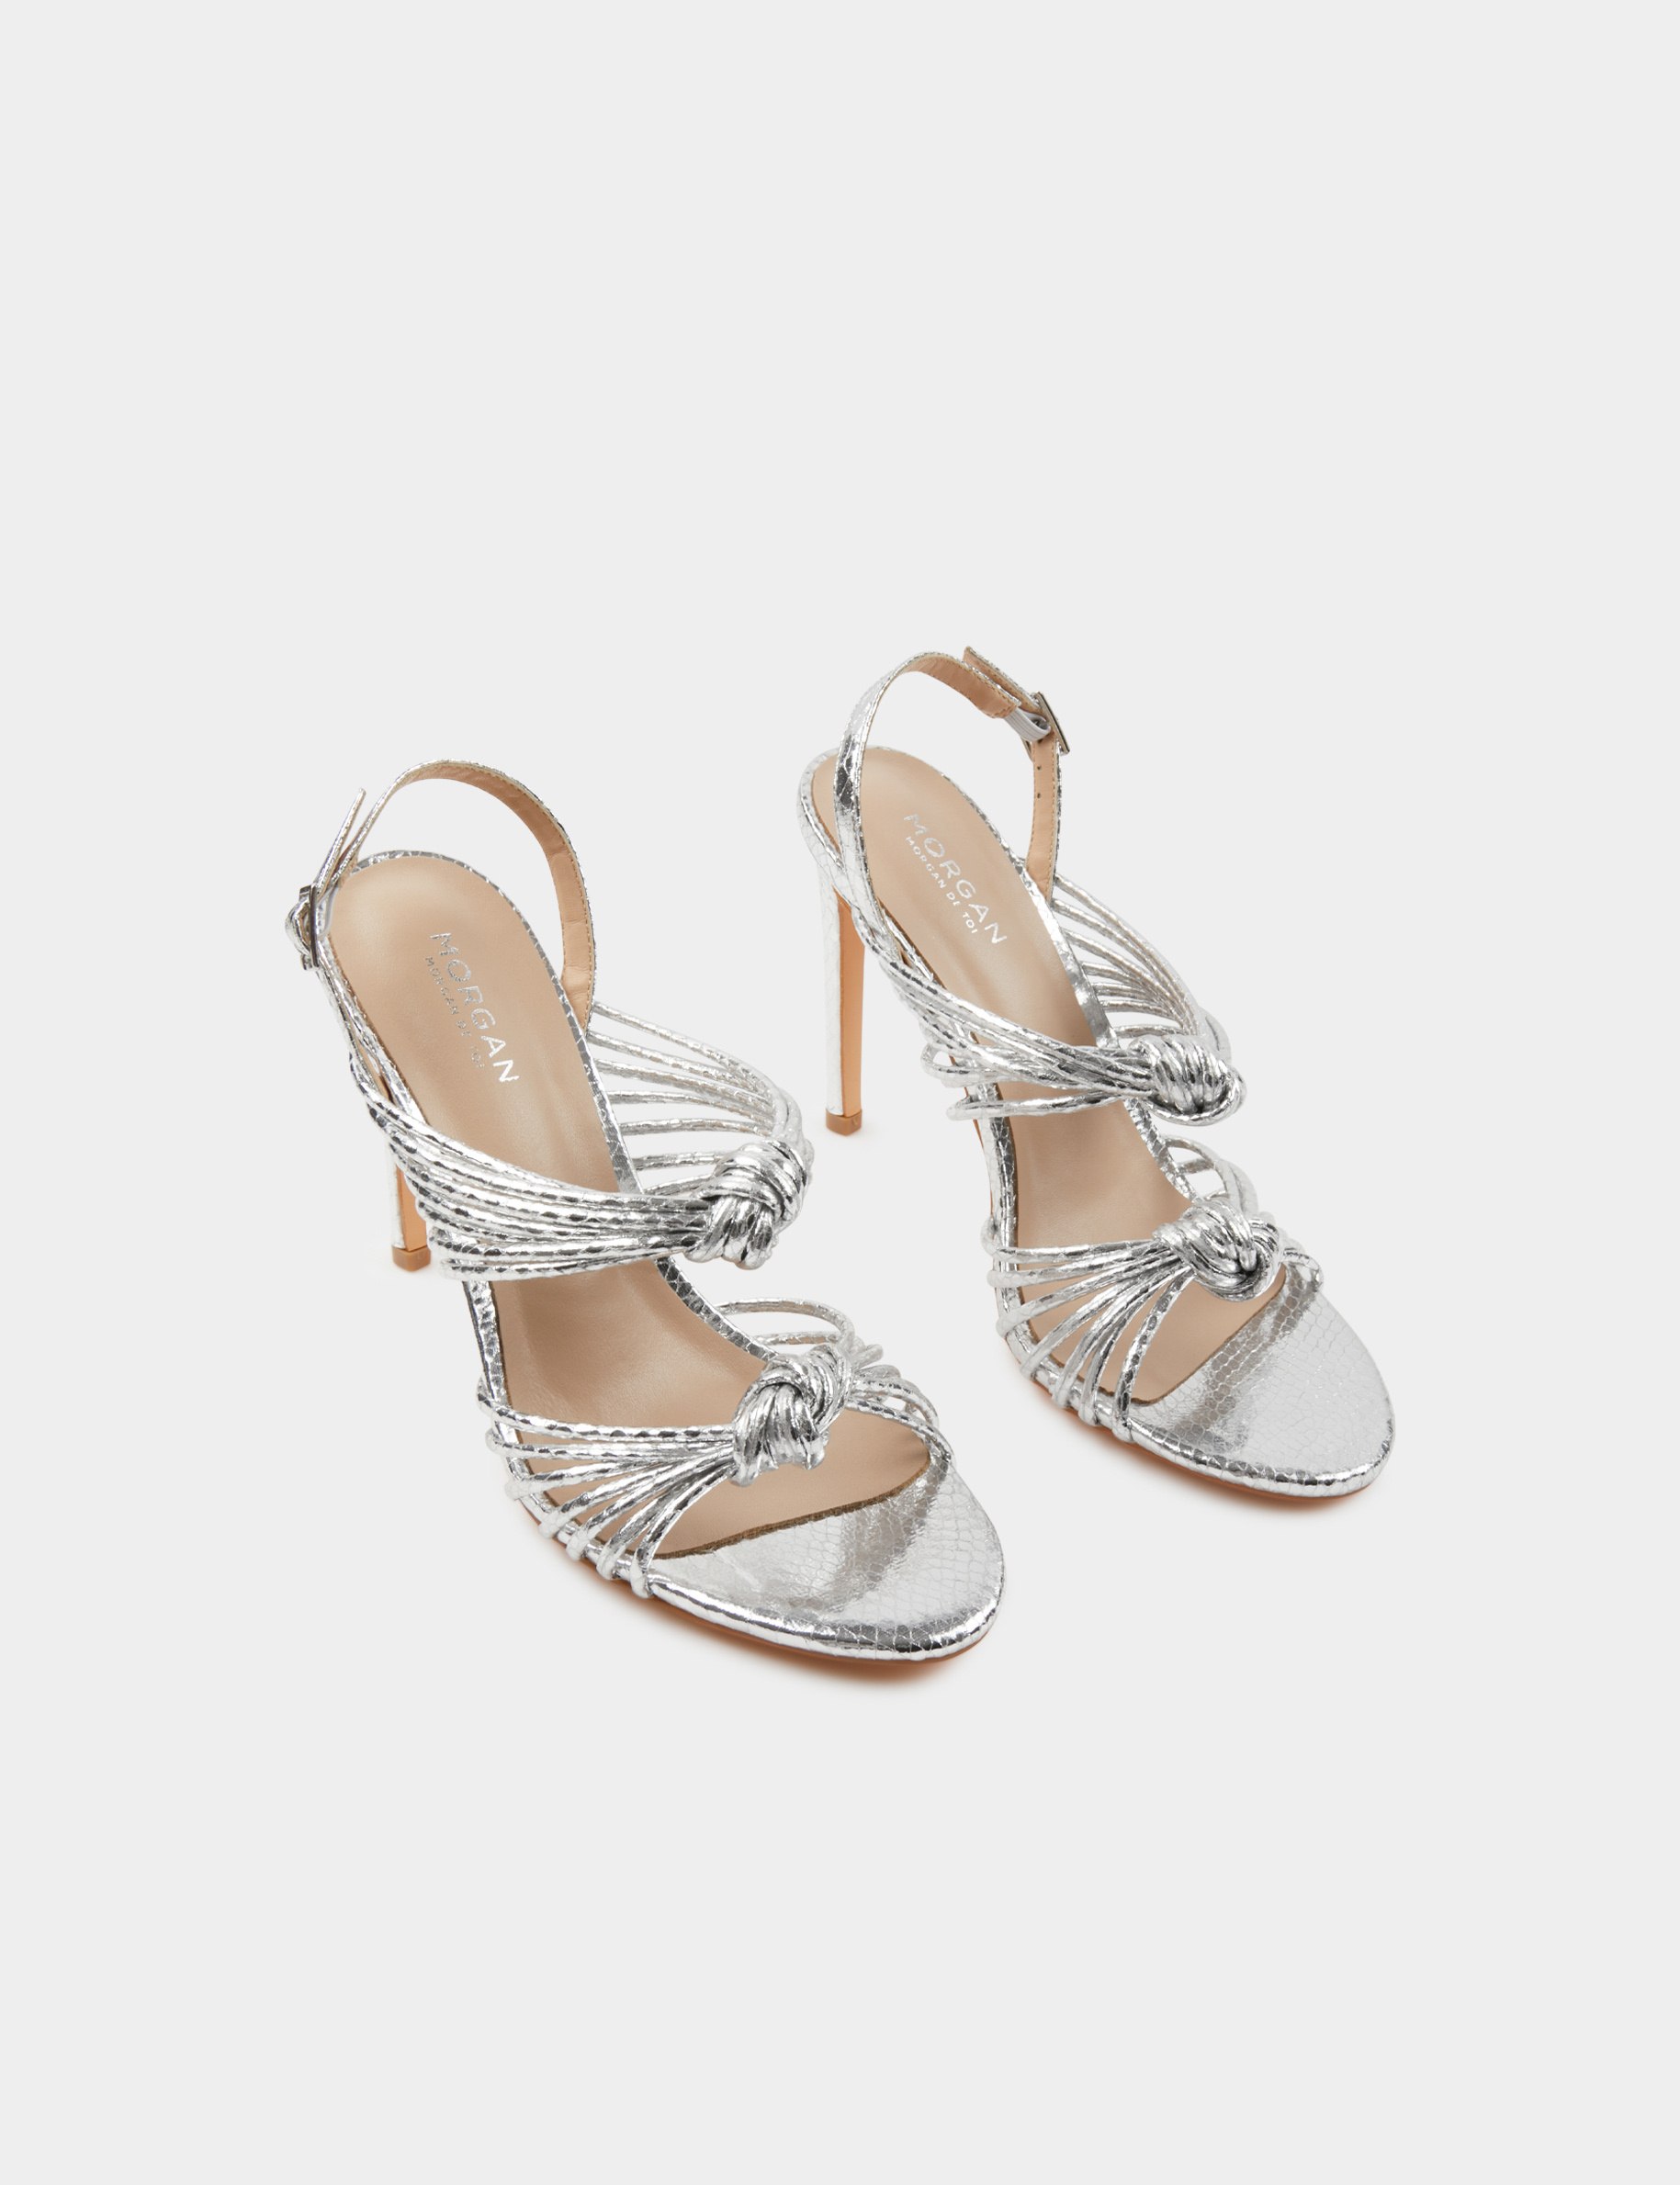 Sandals with heels and tied straps silver ladies'